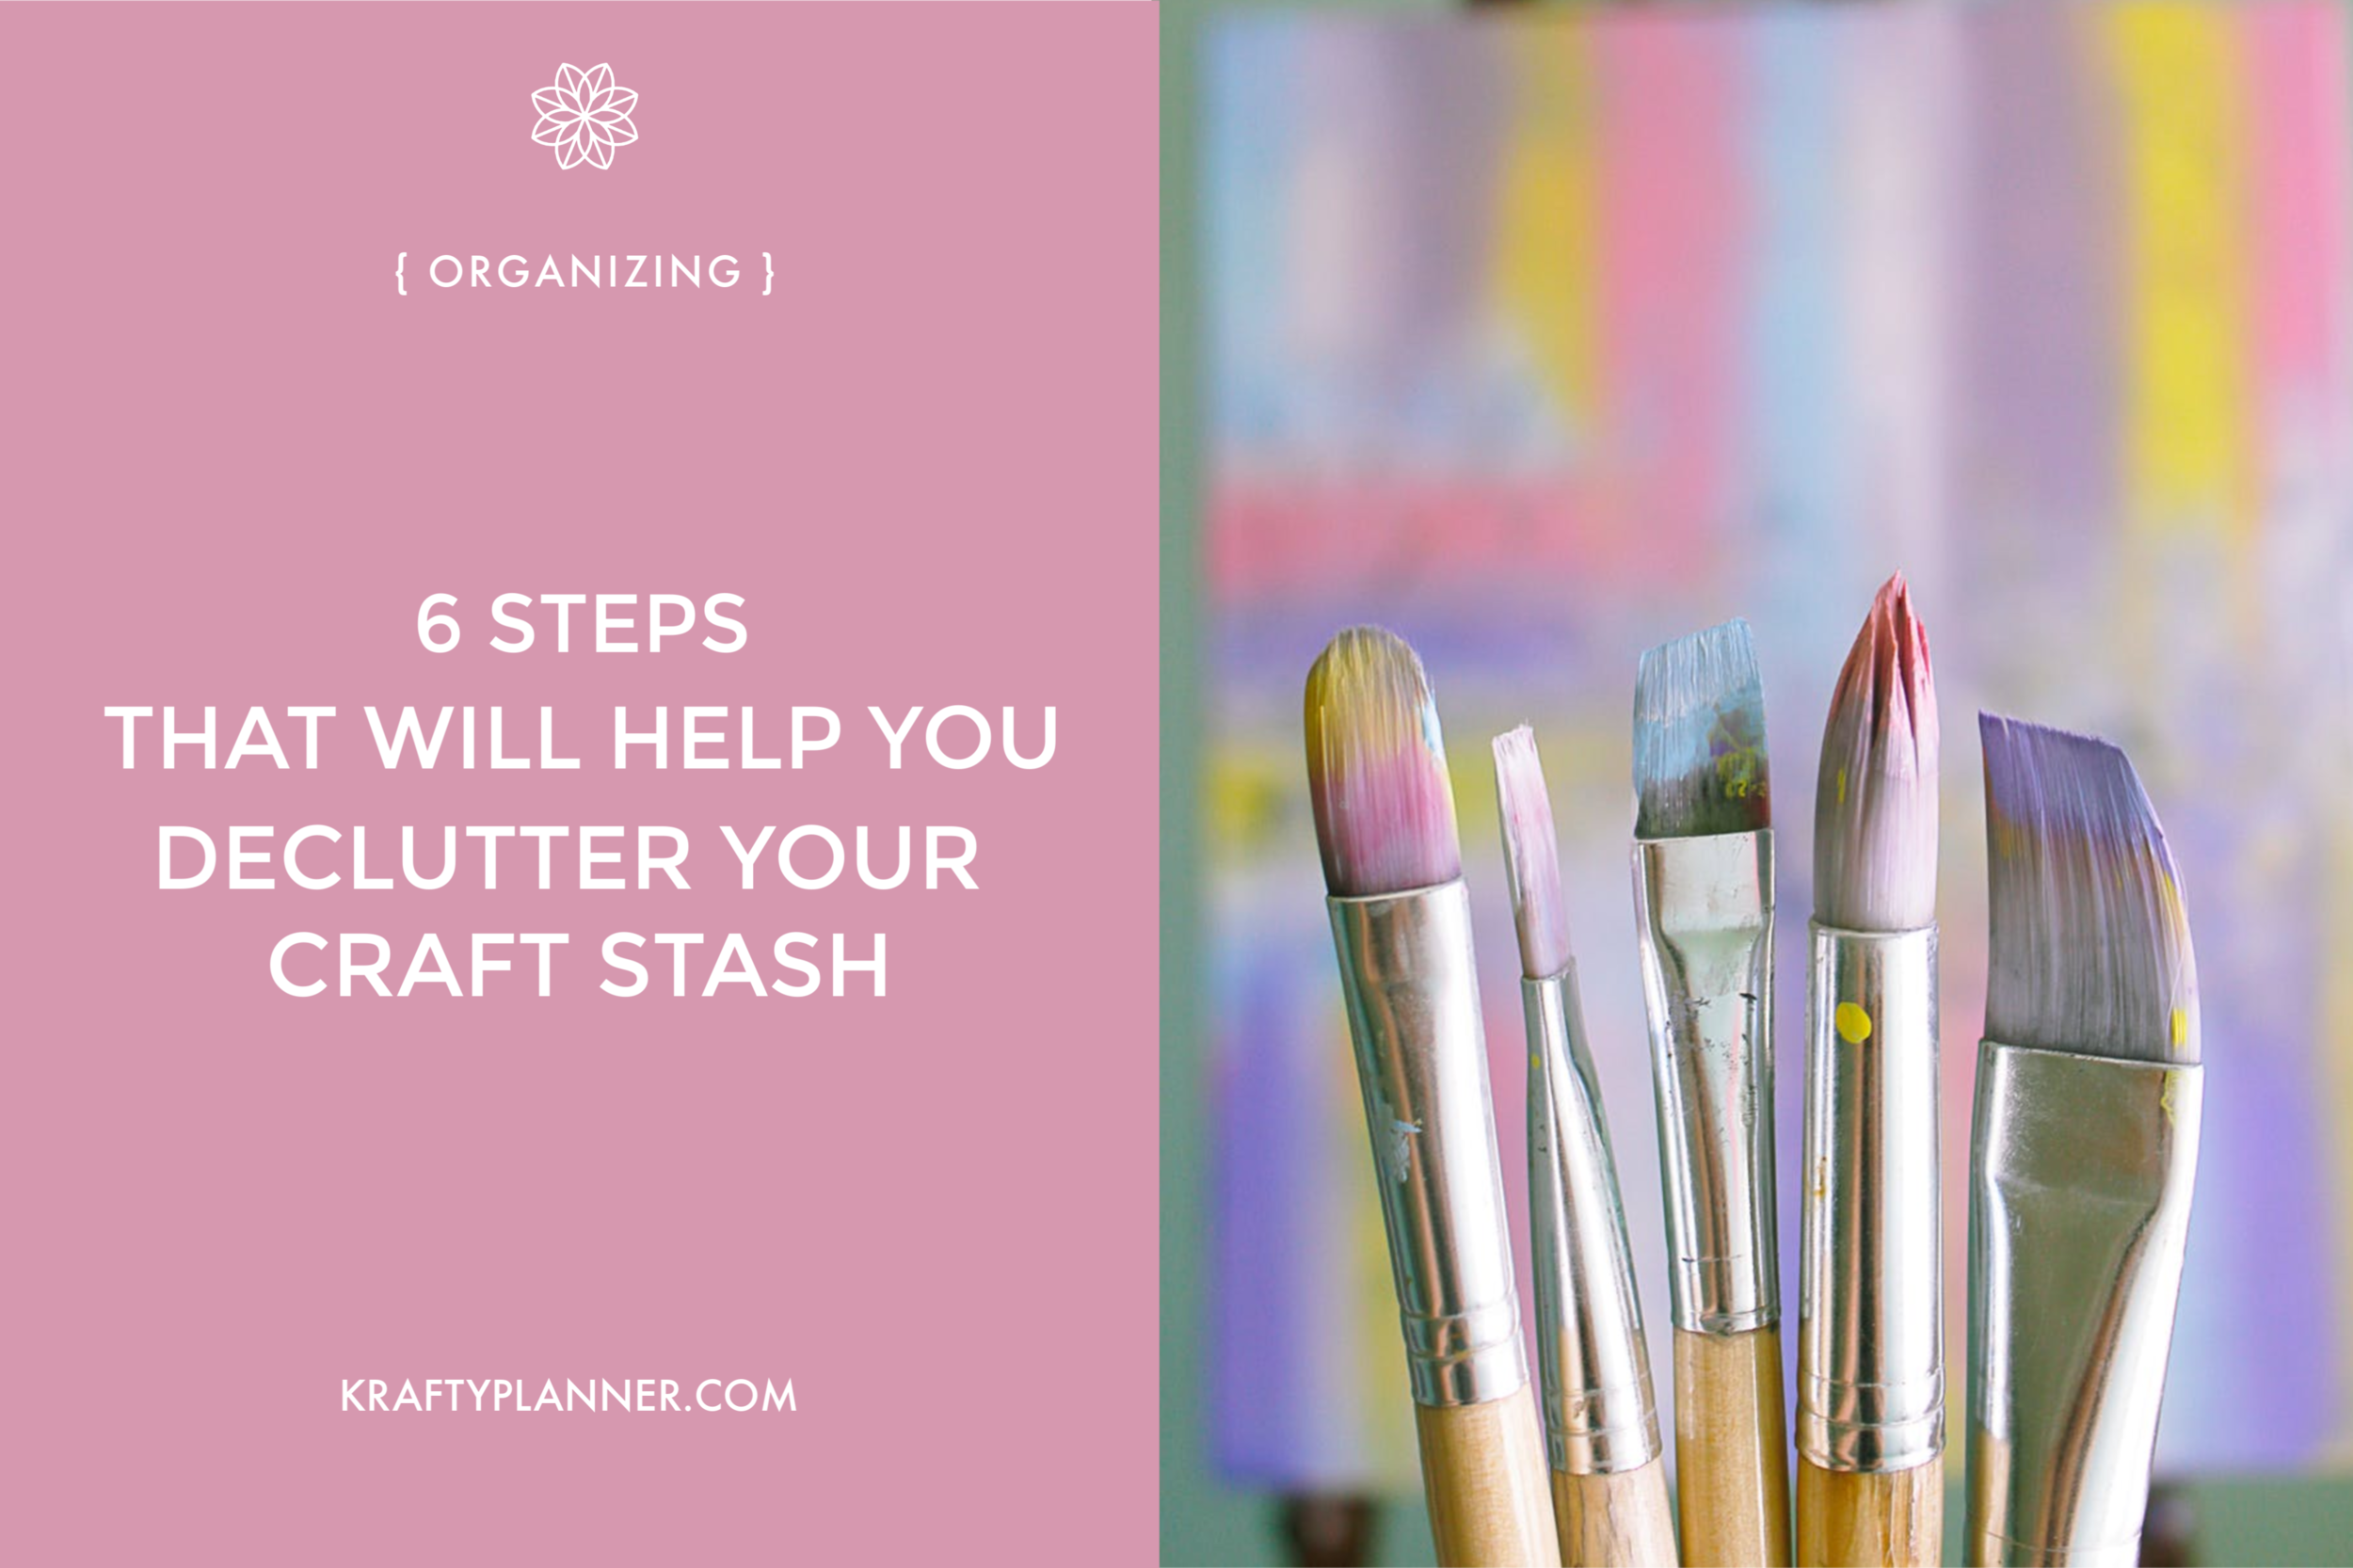 6 Steps That Will Help You Declutter Your Craft Stash Main Image.png